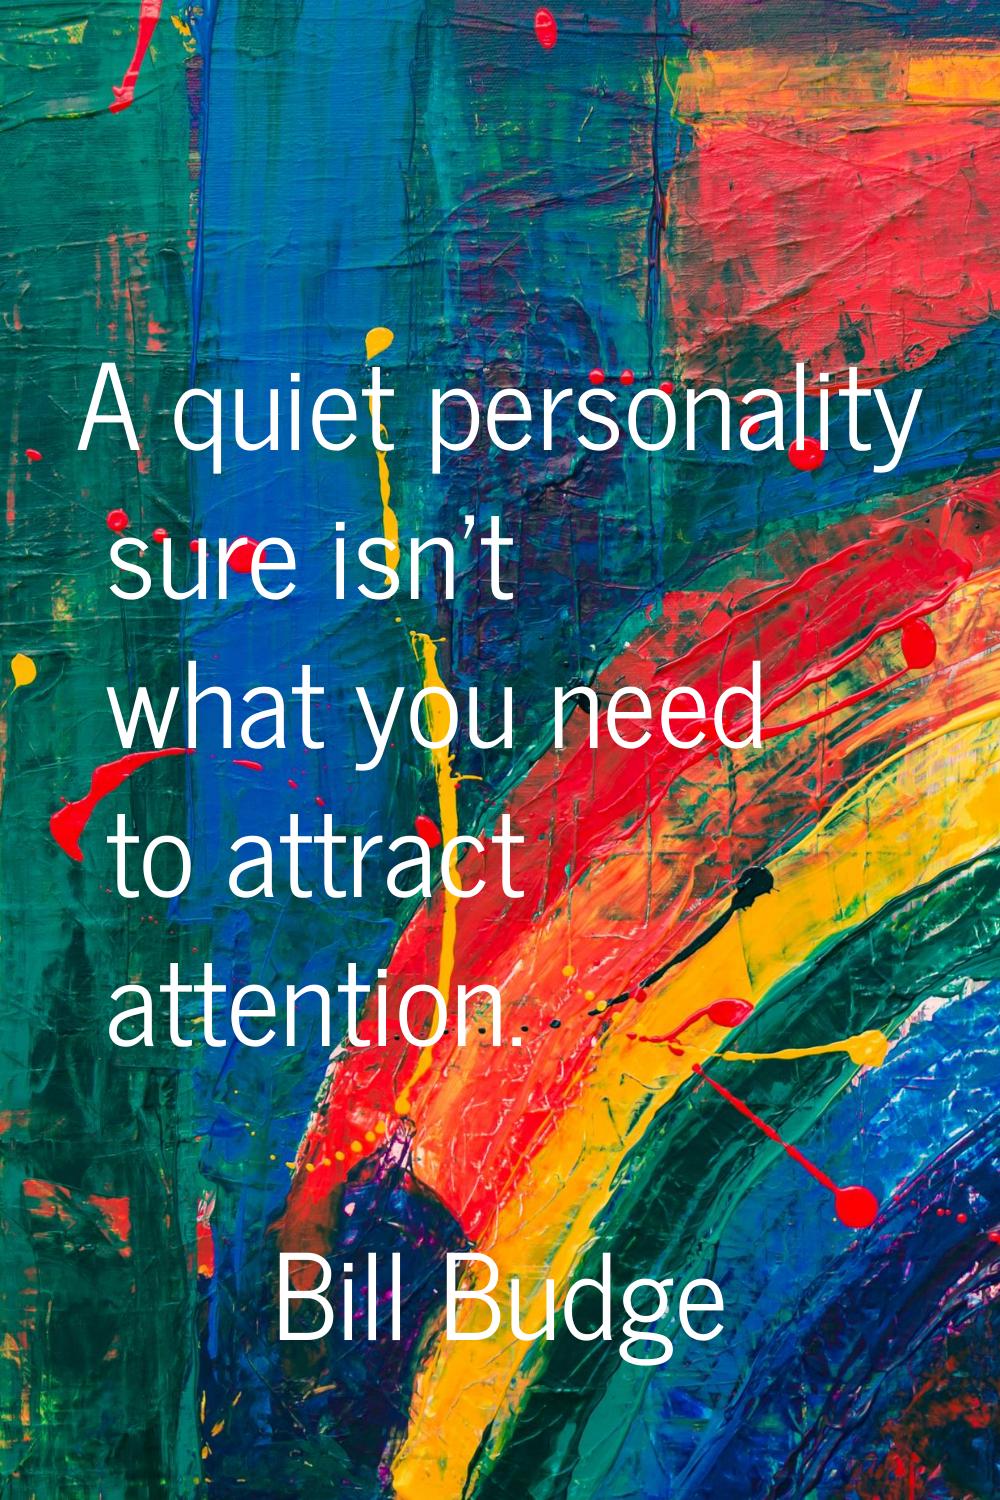 A quiet personality sure isn't what you need to attract attention.